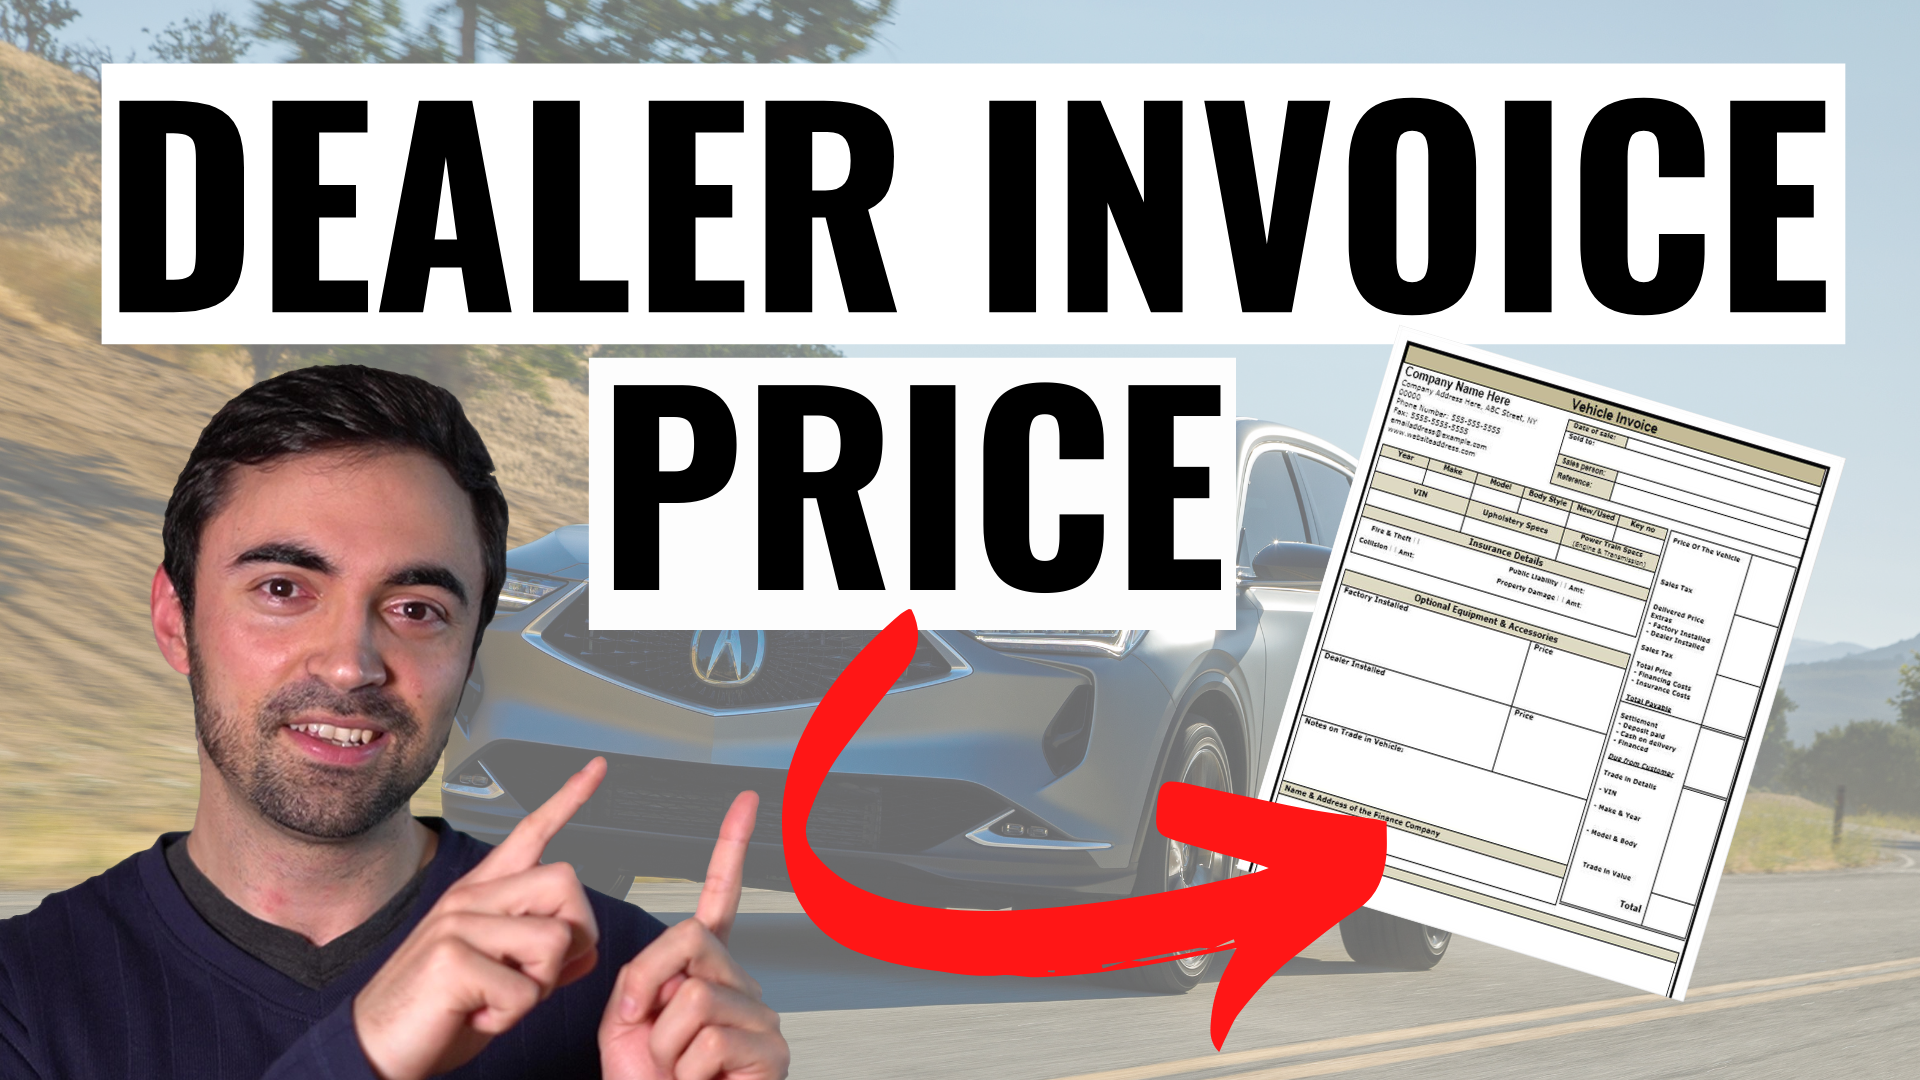 How To Use Dealer Invoice Pricing